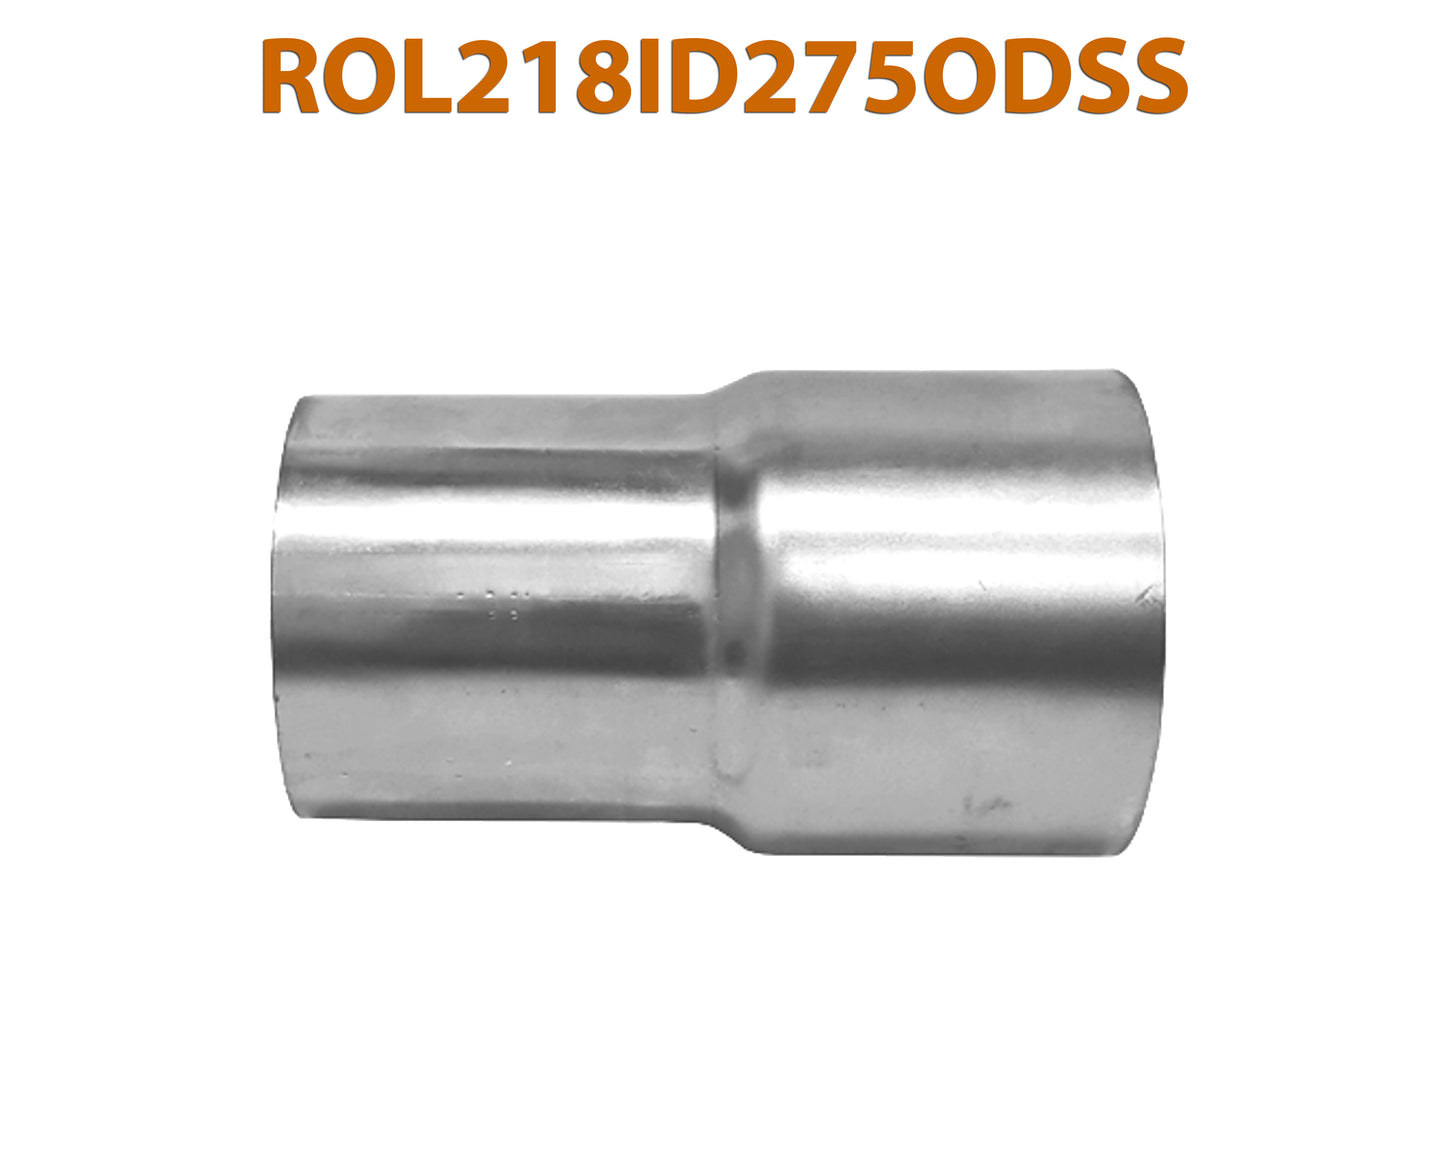 ROL218ID275ODSS 648217 2 1/8” ID to 2 3/4” OD Stainless Steel Exhaust Pipe to Component Adapter Reducer